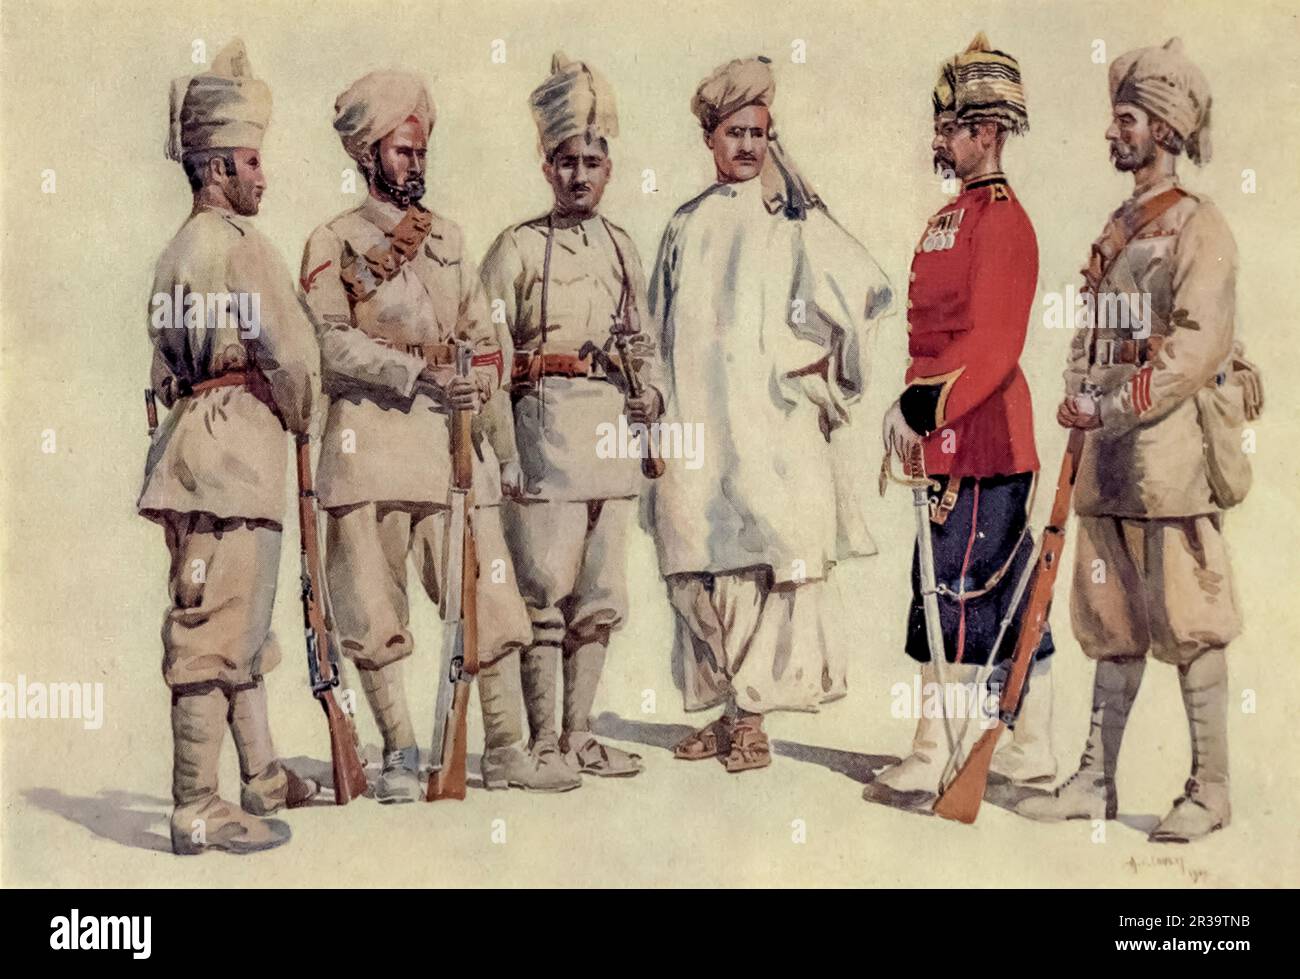 19th Punjabis (now 5th Battalion The Punjab Regiment, Pakistan Army). Left to Right: Afridi, Sikh, Bangash, Swati, Yusufzai, Punjabi Muslim painted by Major Alfred Crowdy Lovett, (1862-1919) from the book ' The armies of India ' by Major George Fletcher MacMunn, (1869-1952) Publication date 1911 Publisher London, Adam and Charles Black Stock Photo